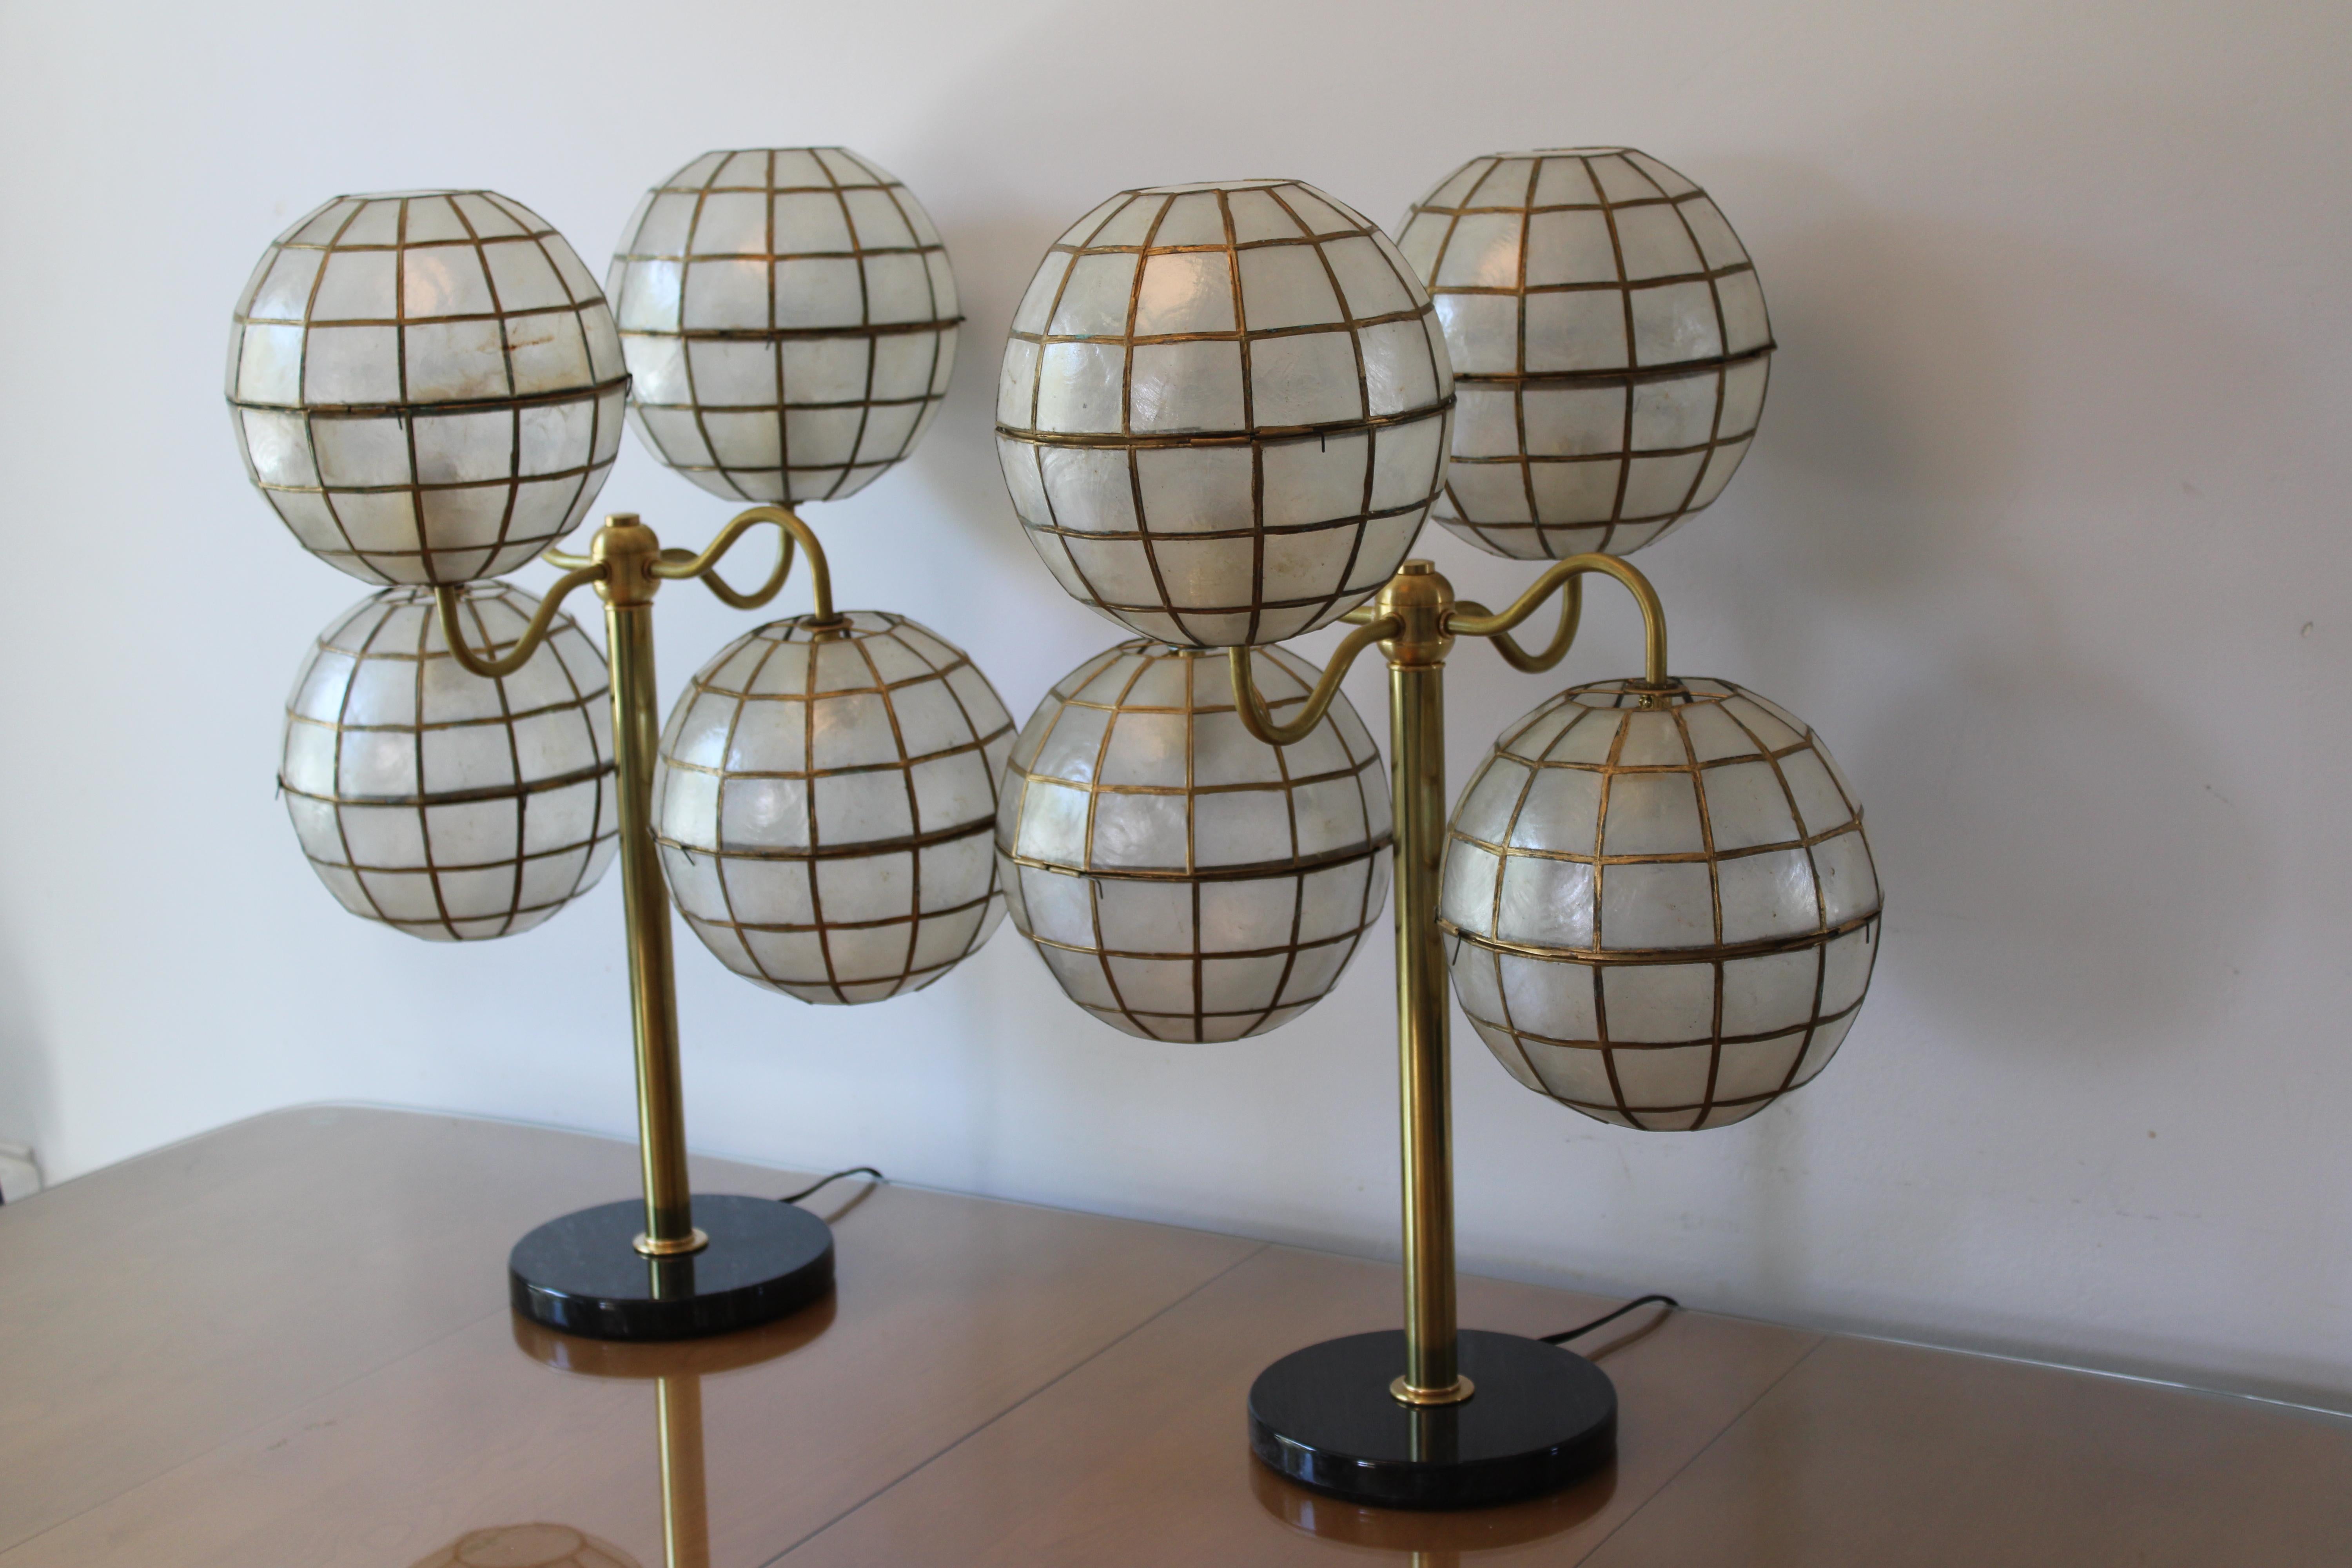 We took vintage capiz shell globes and made these wonderful lamps. All new brass hardware and marble bases. Newly rewired with an on/off switch. Each lamp measures 20” diameter and 24” high. Capiz globes are 8” diameter and 8.5” high. Marble base is